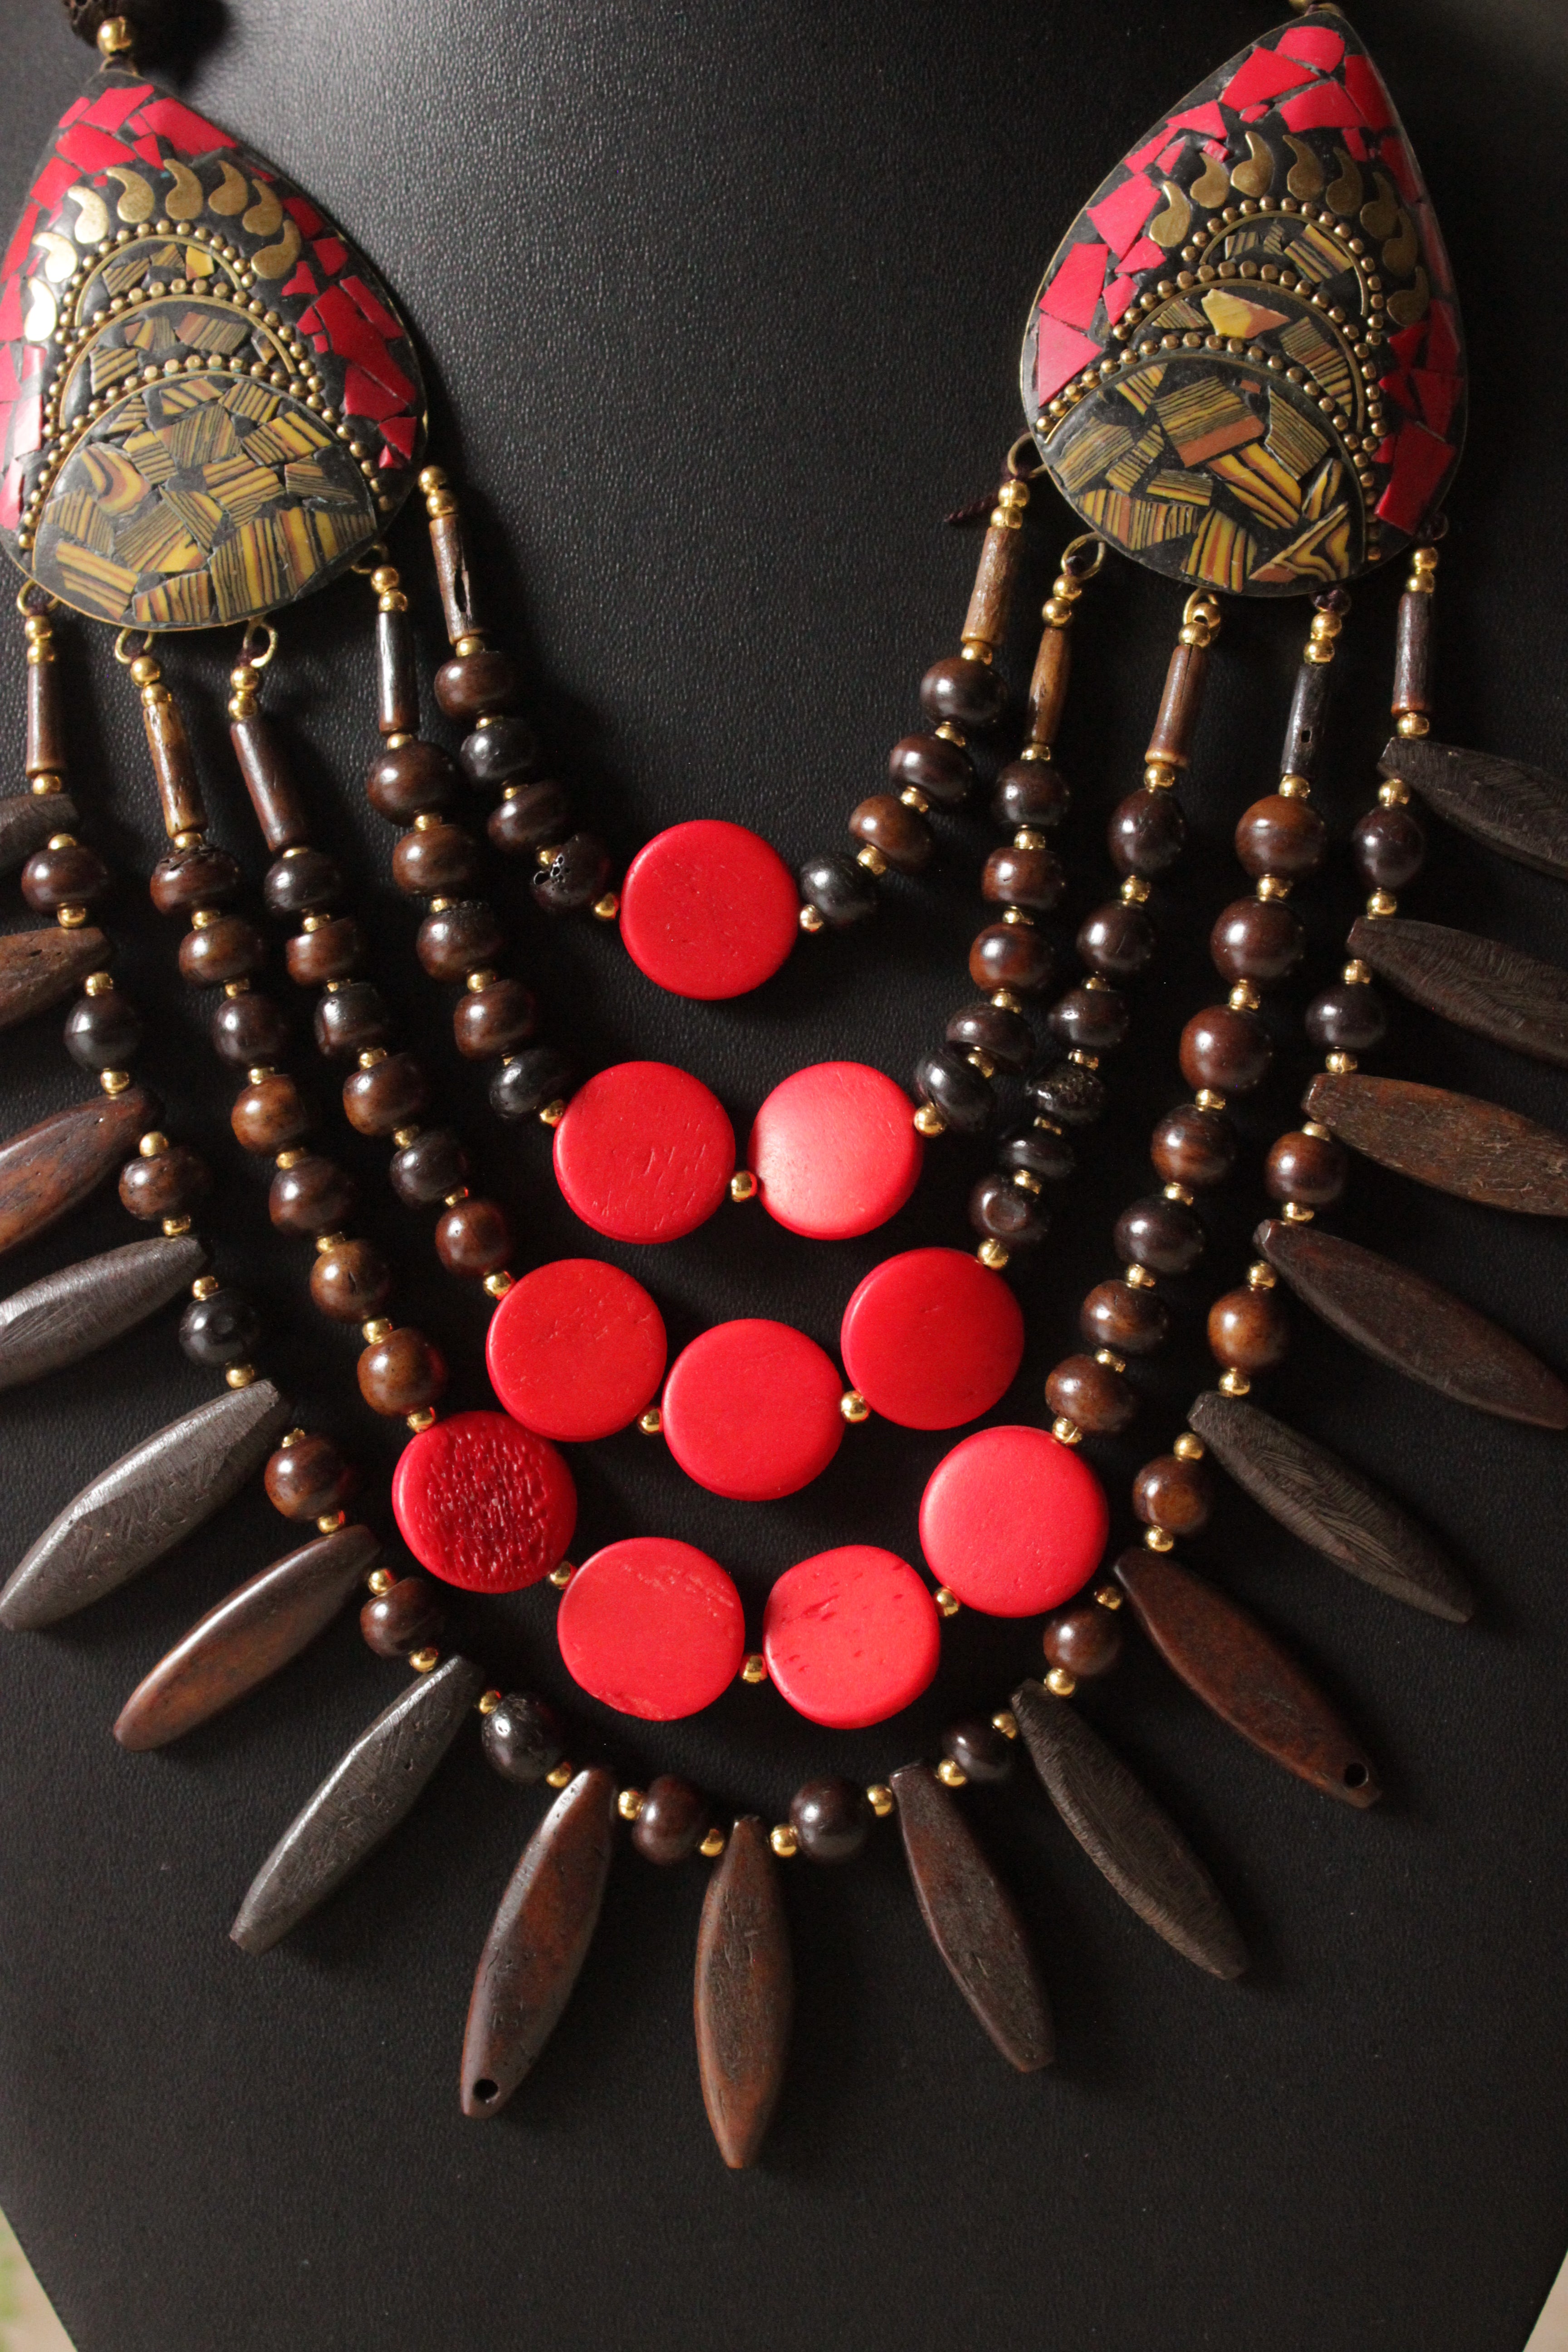 Red & Brown Wooden Beads Tribal Motifs Handcrafted Statement African Tribal Necklace